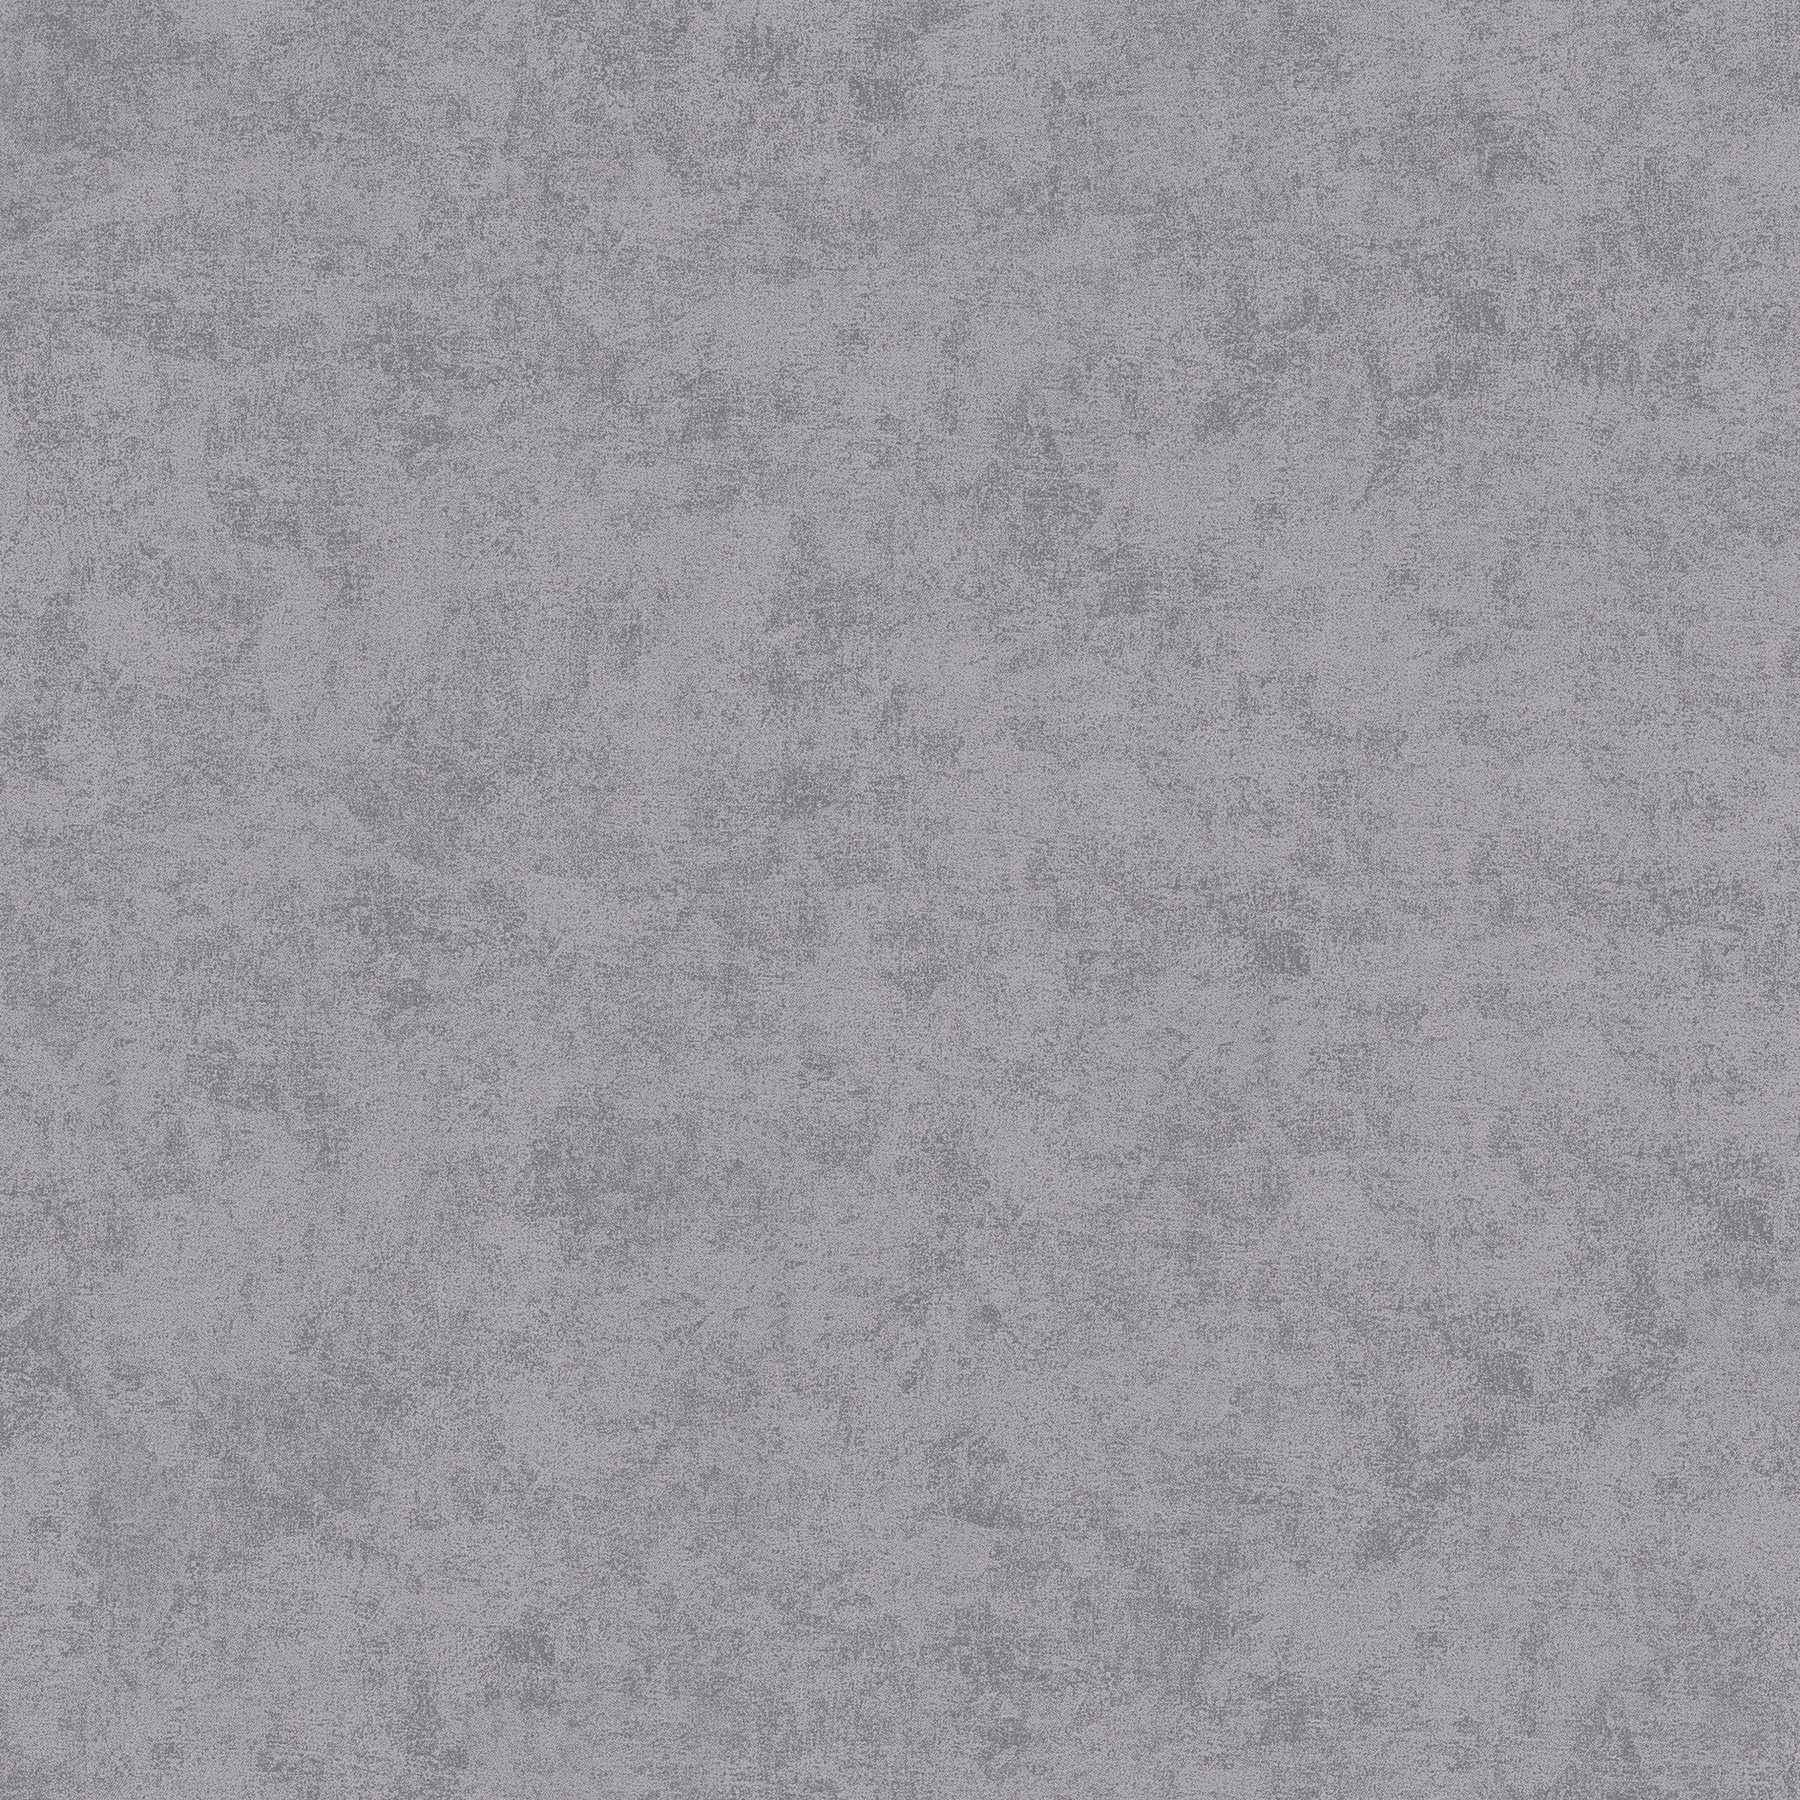 Plain non-woven wallpaper with mottled structure - grey
